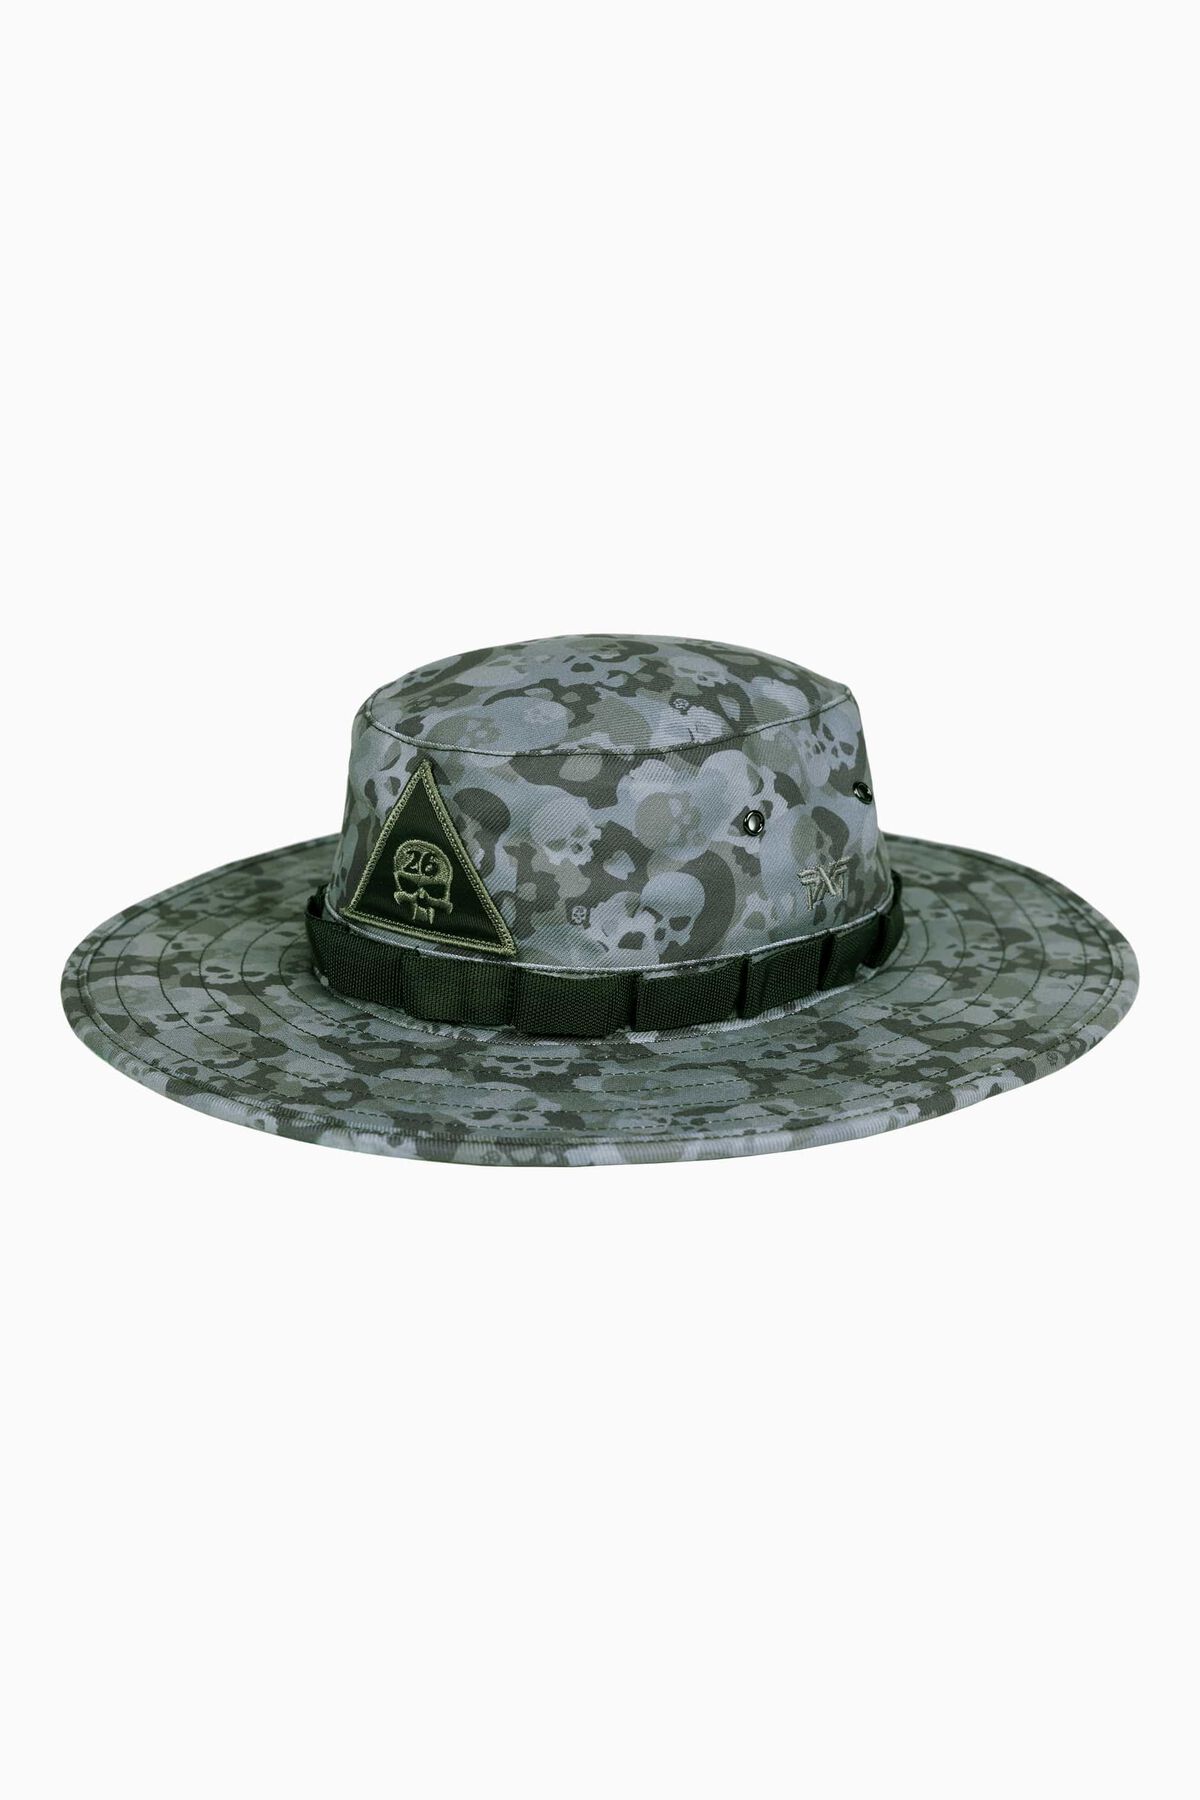 Darkness Skull Camo Bush Hat  Shop the Highest Quality Golf Apparel, Gear,  Accessories and Golf Clubs at PXG